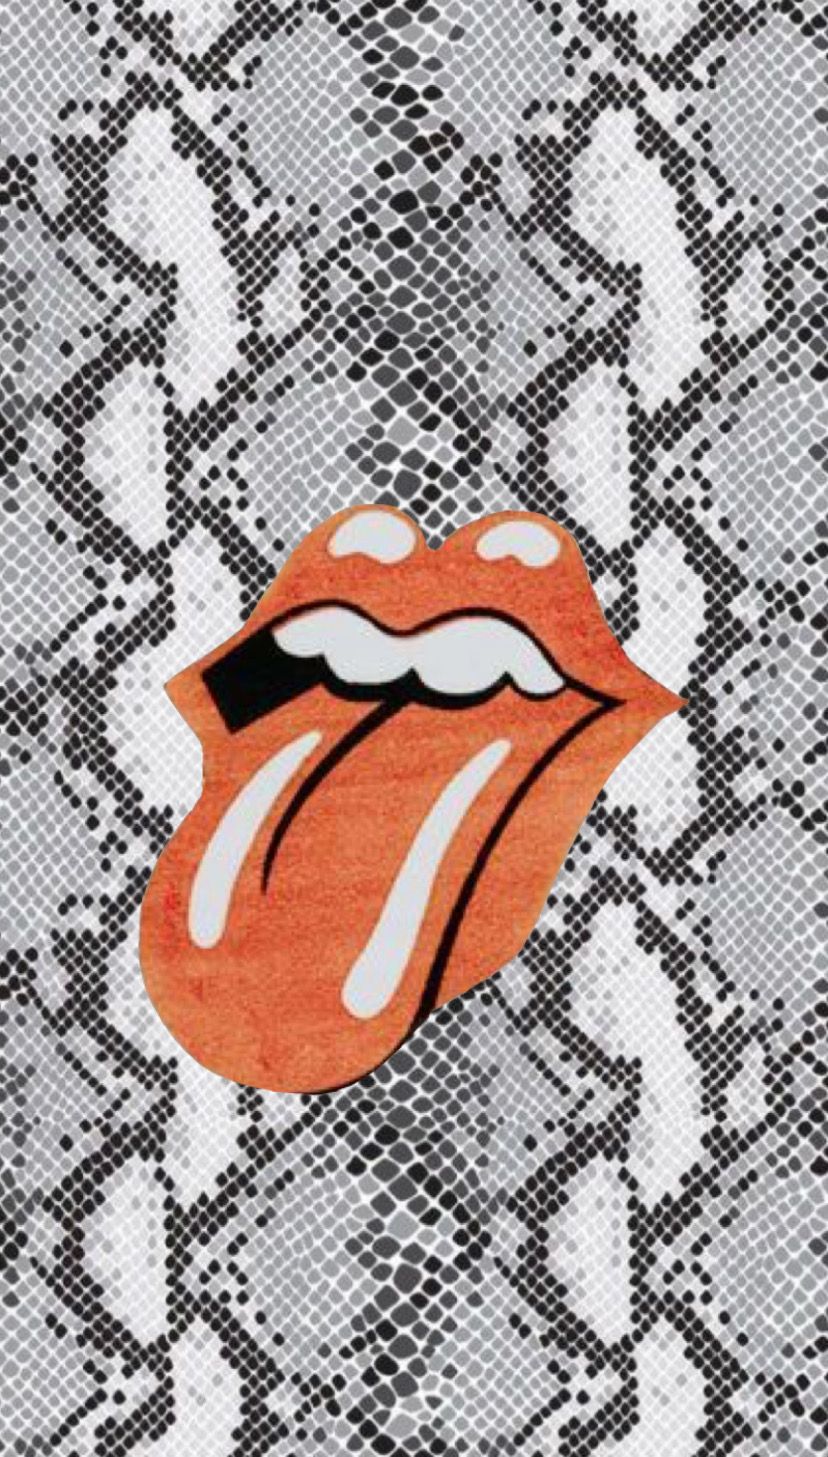 Rolling stones background cute patterns wallpaper preppy wallpaper iphone wallpaper pattern